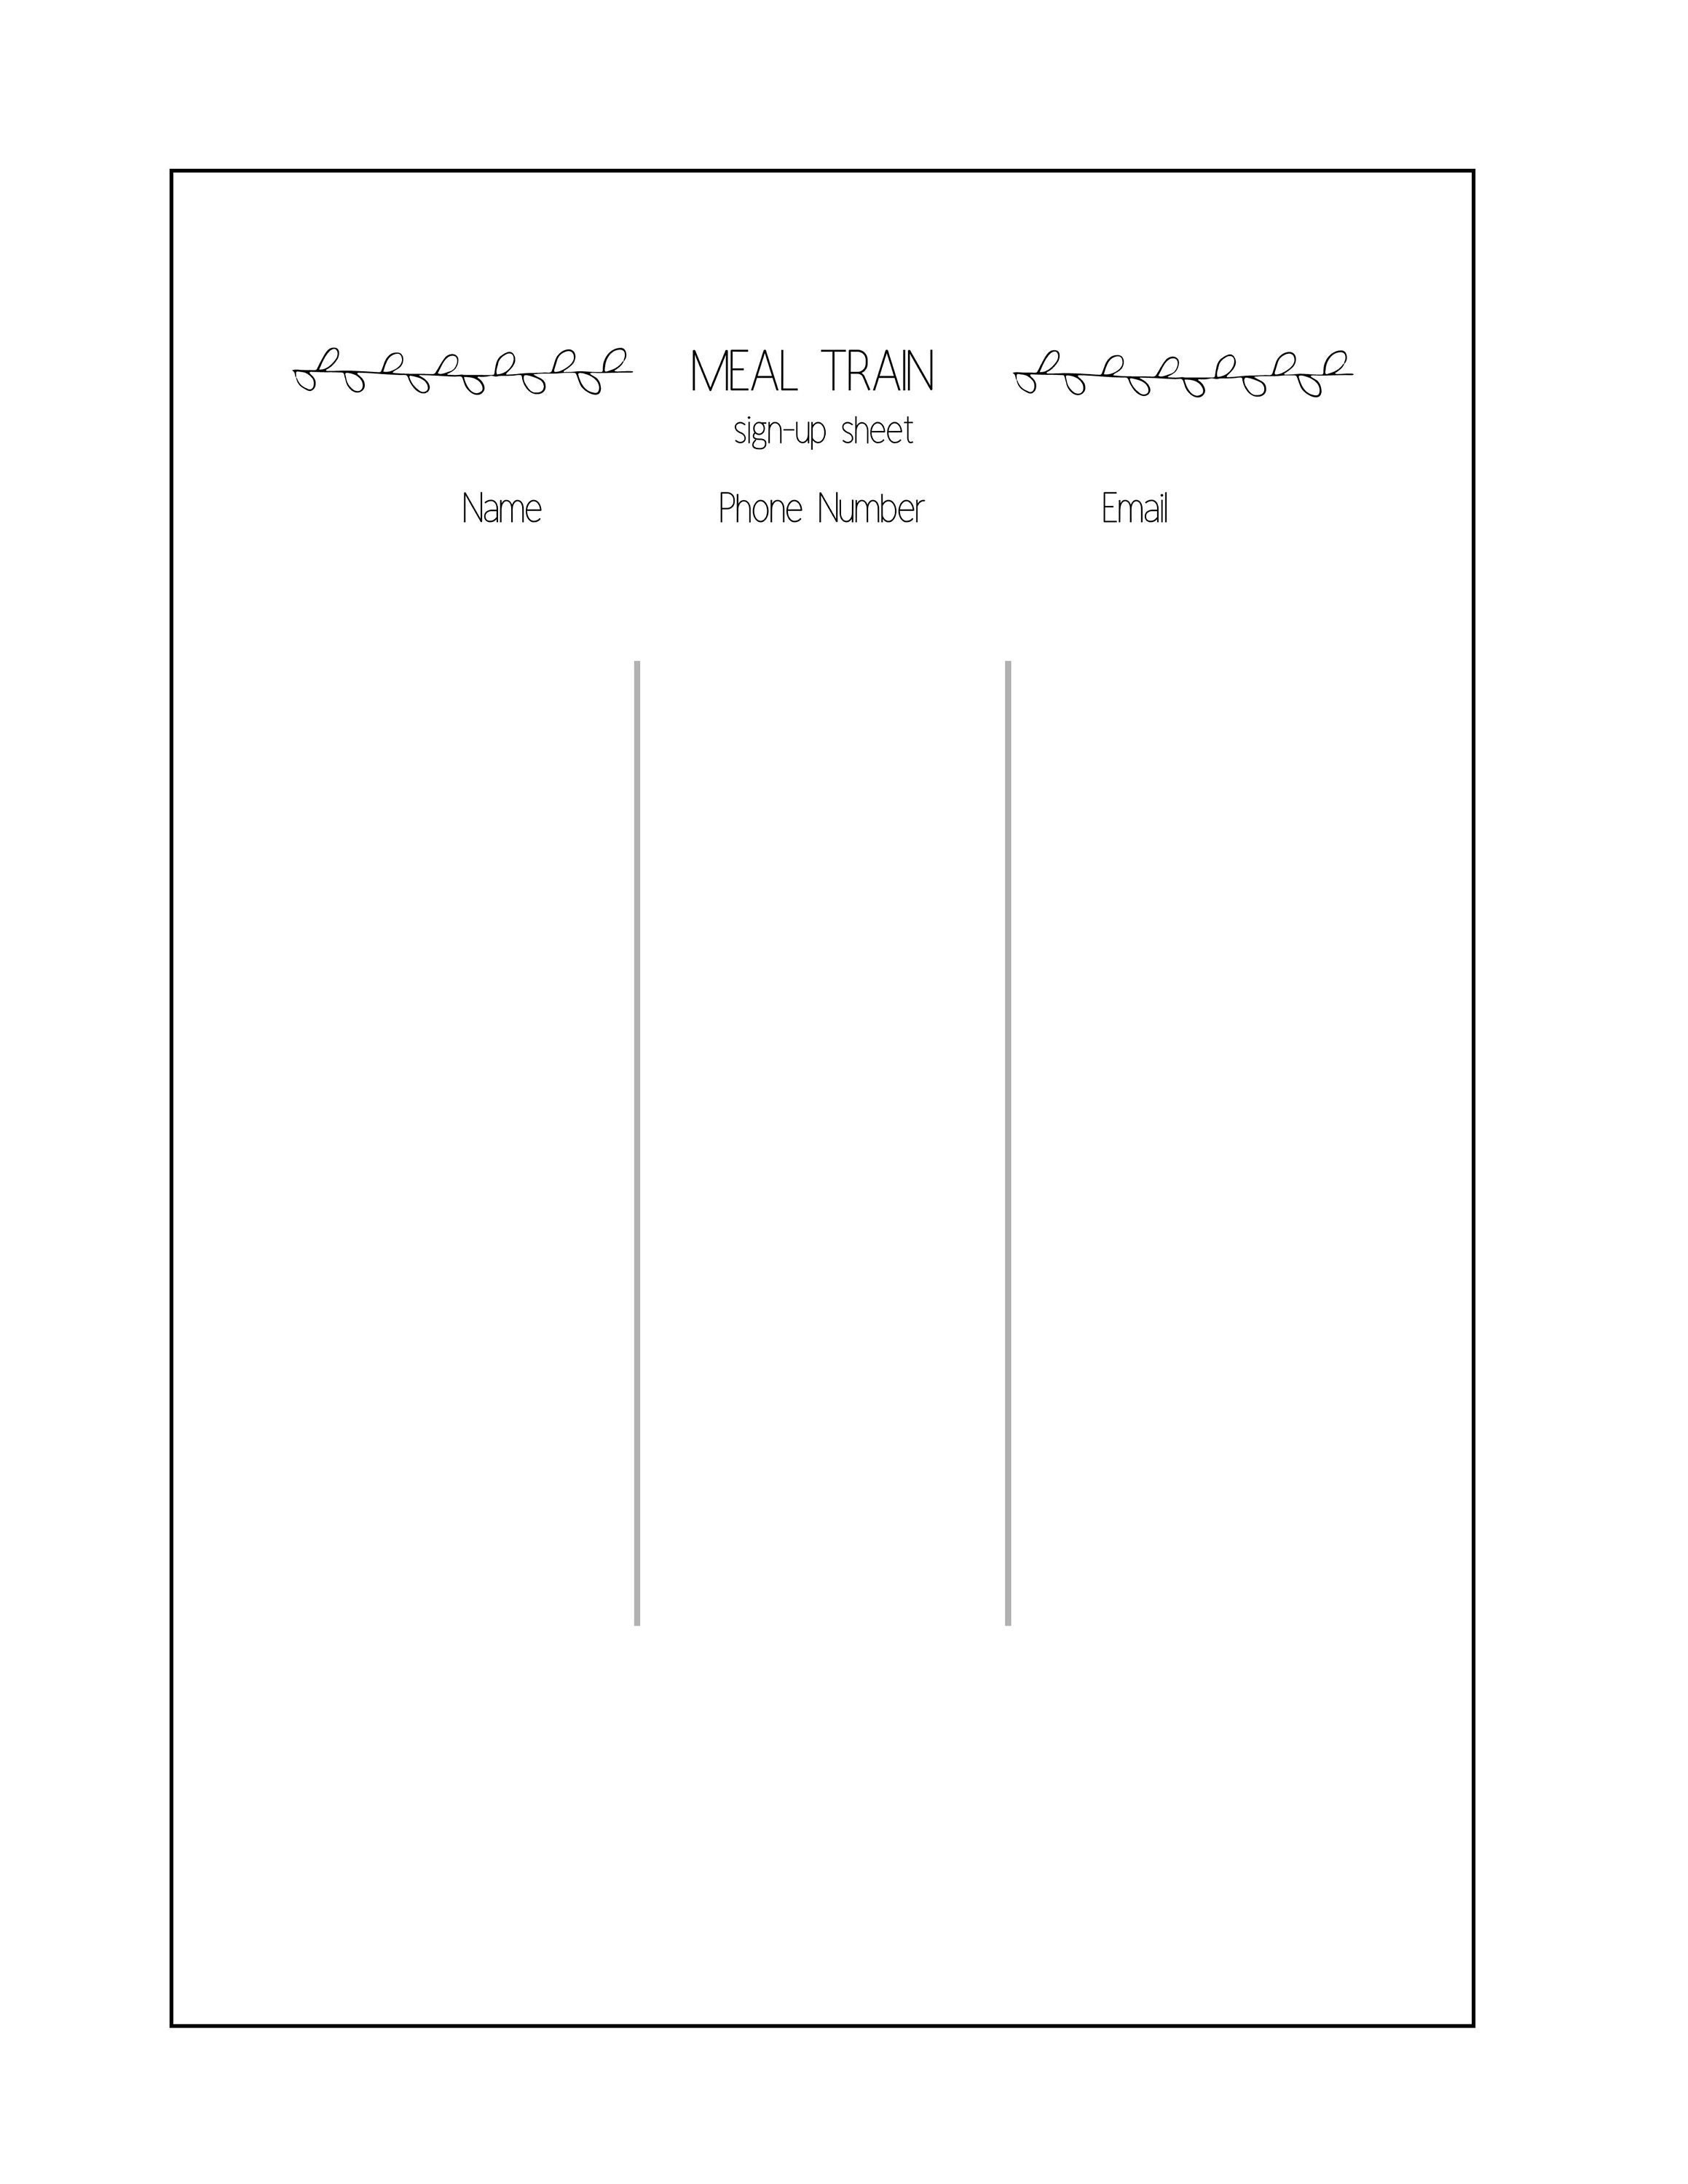 meal-train-meal-train-printable-printable-meal-train-meal-etsy